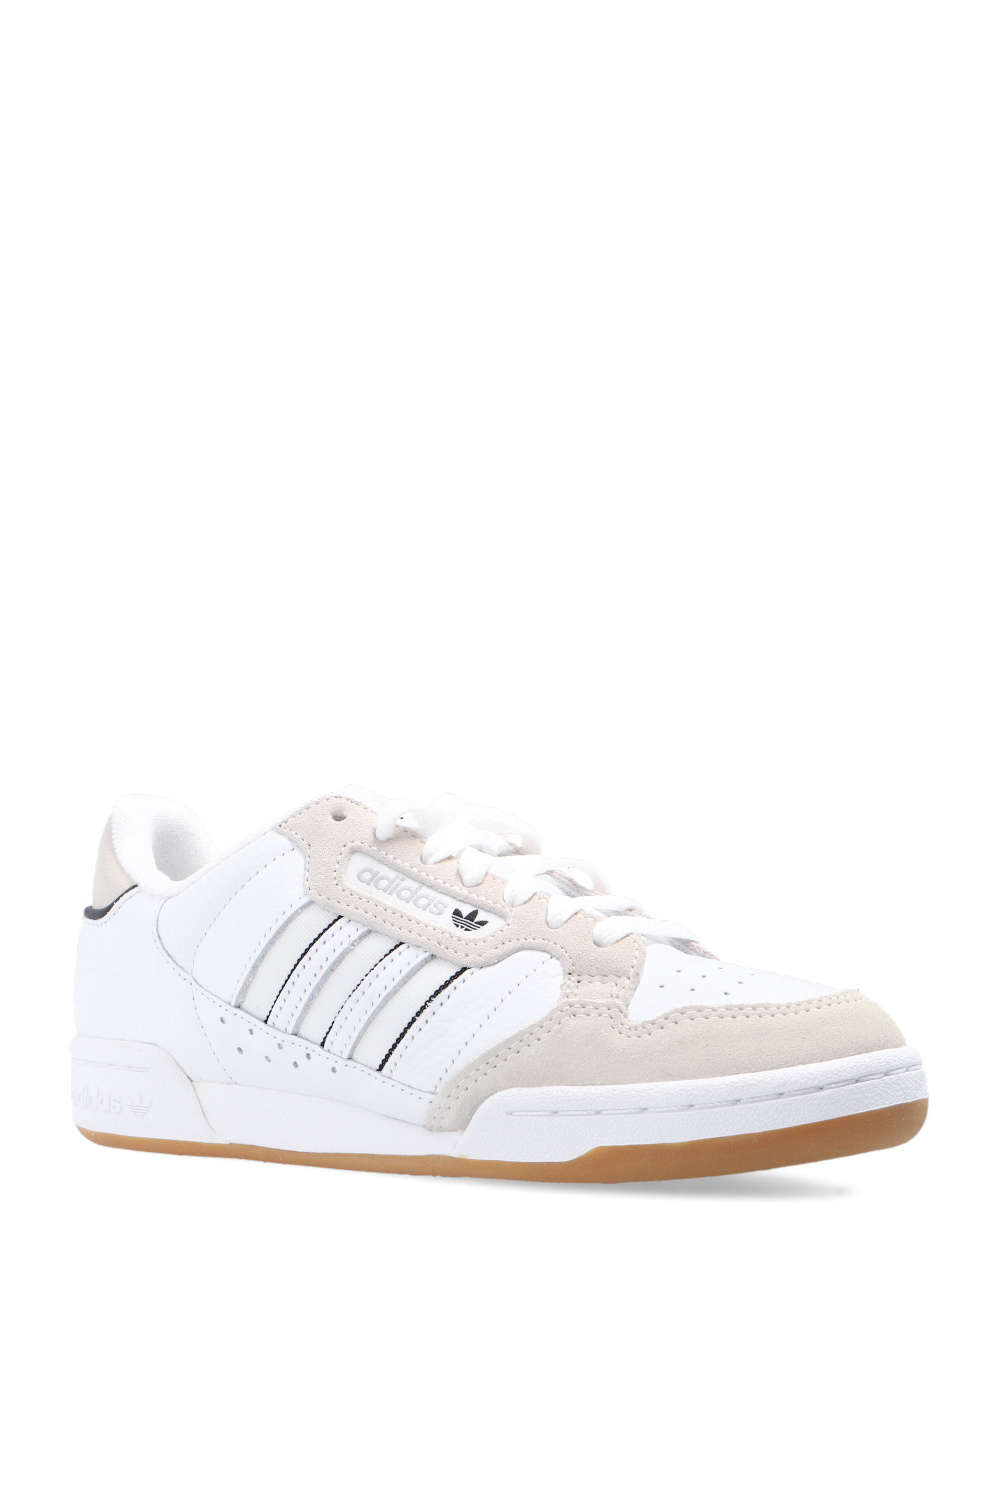 champion x adidas nmd Originals 80 ADIDAS boost IetpShops | Stripes\' Shoes Women\'s xr_1 \'Continental | | sneakers white